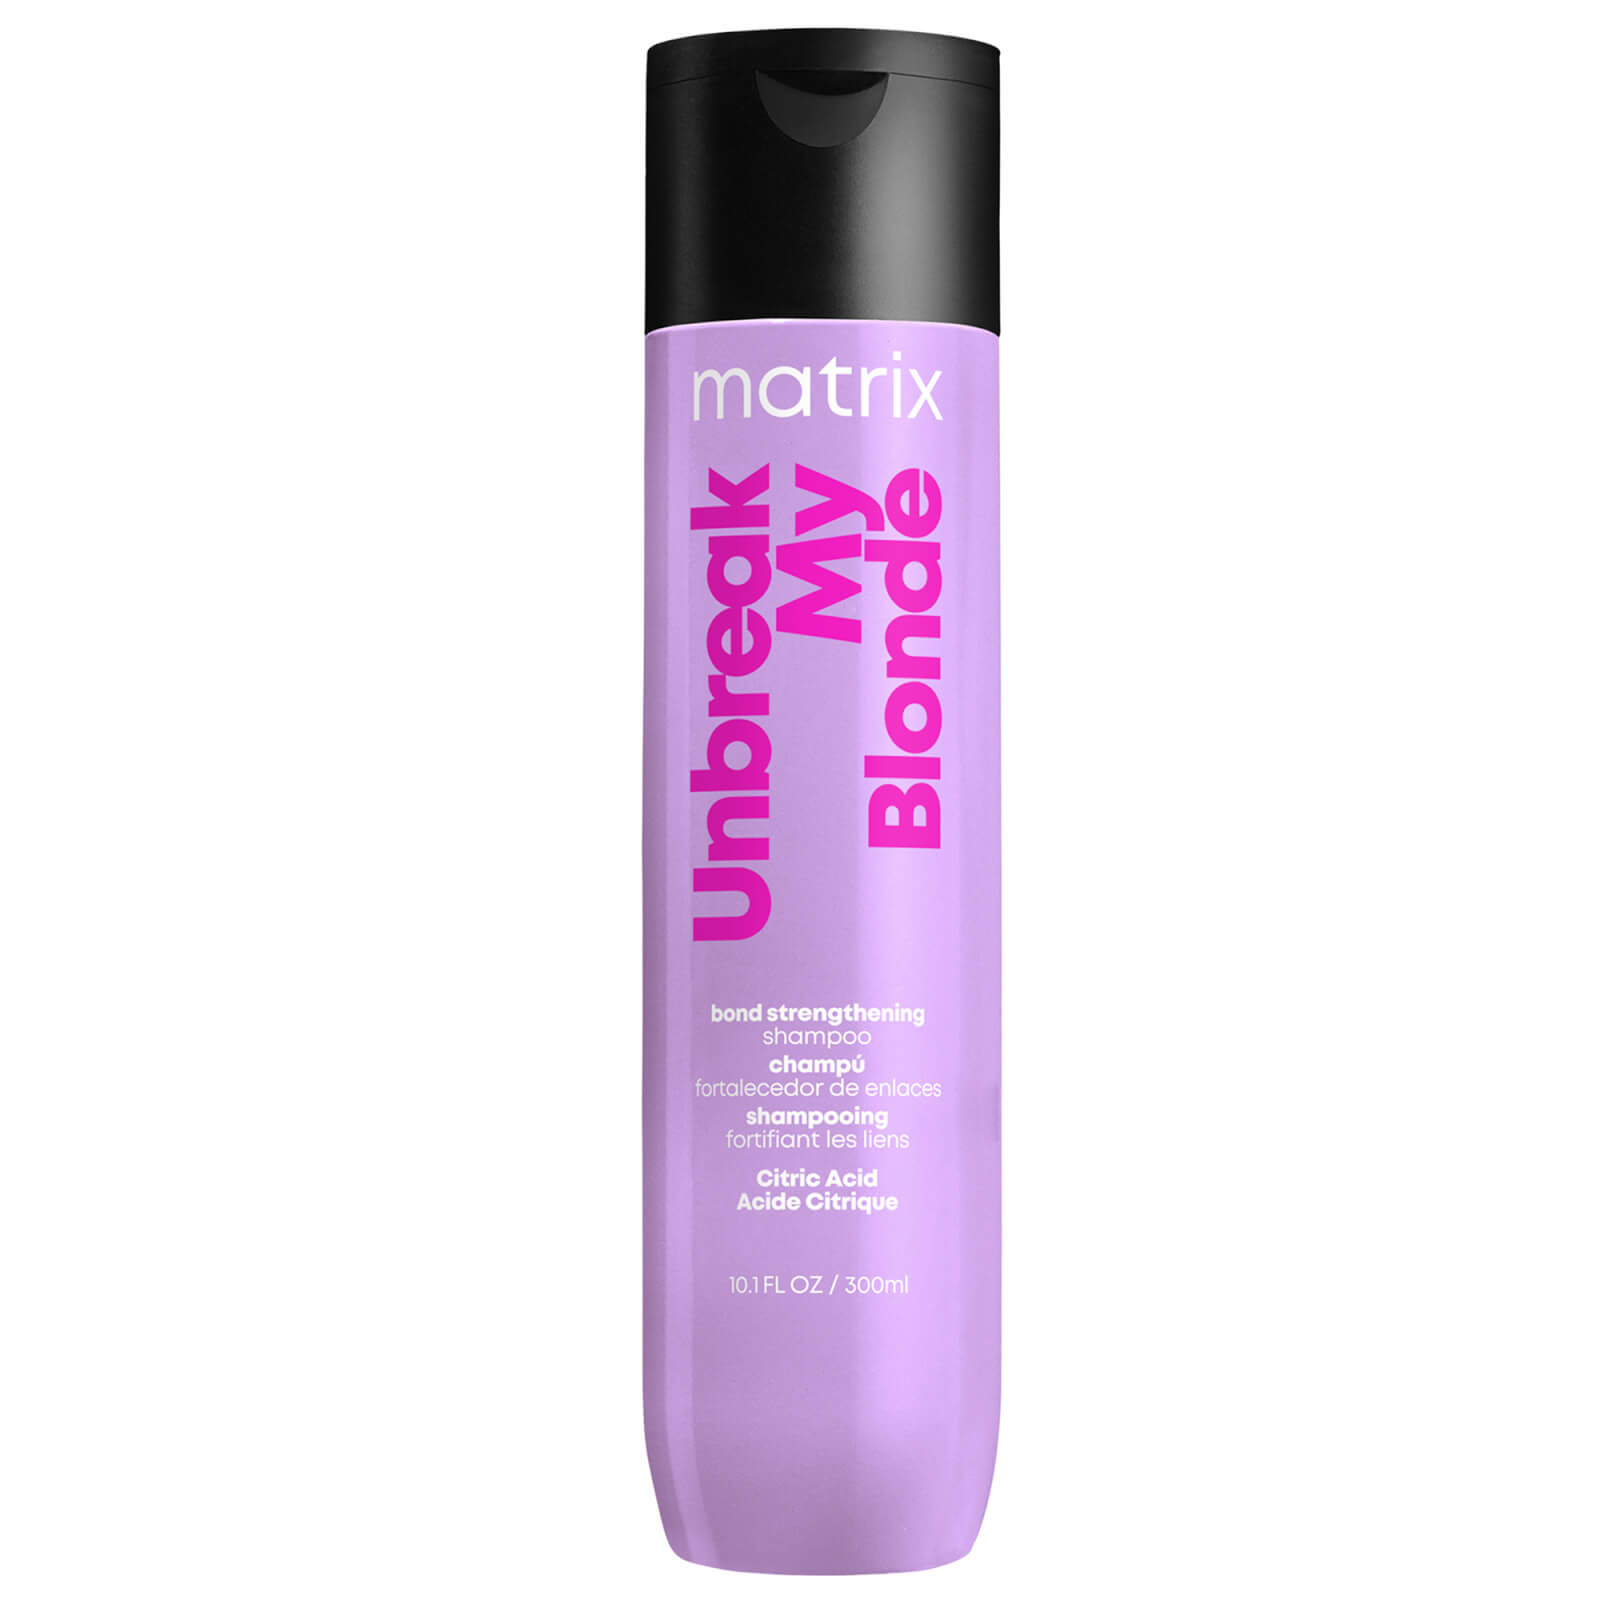 hqhair uk product